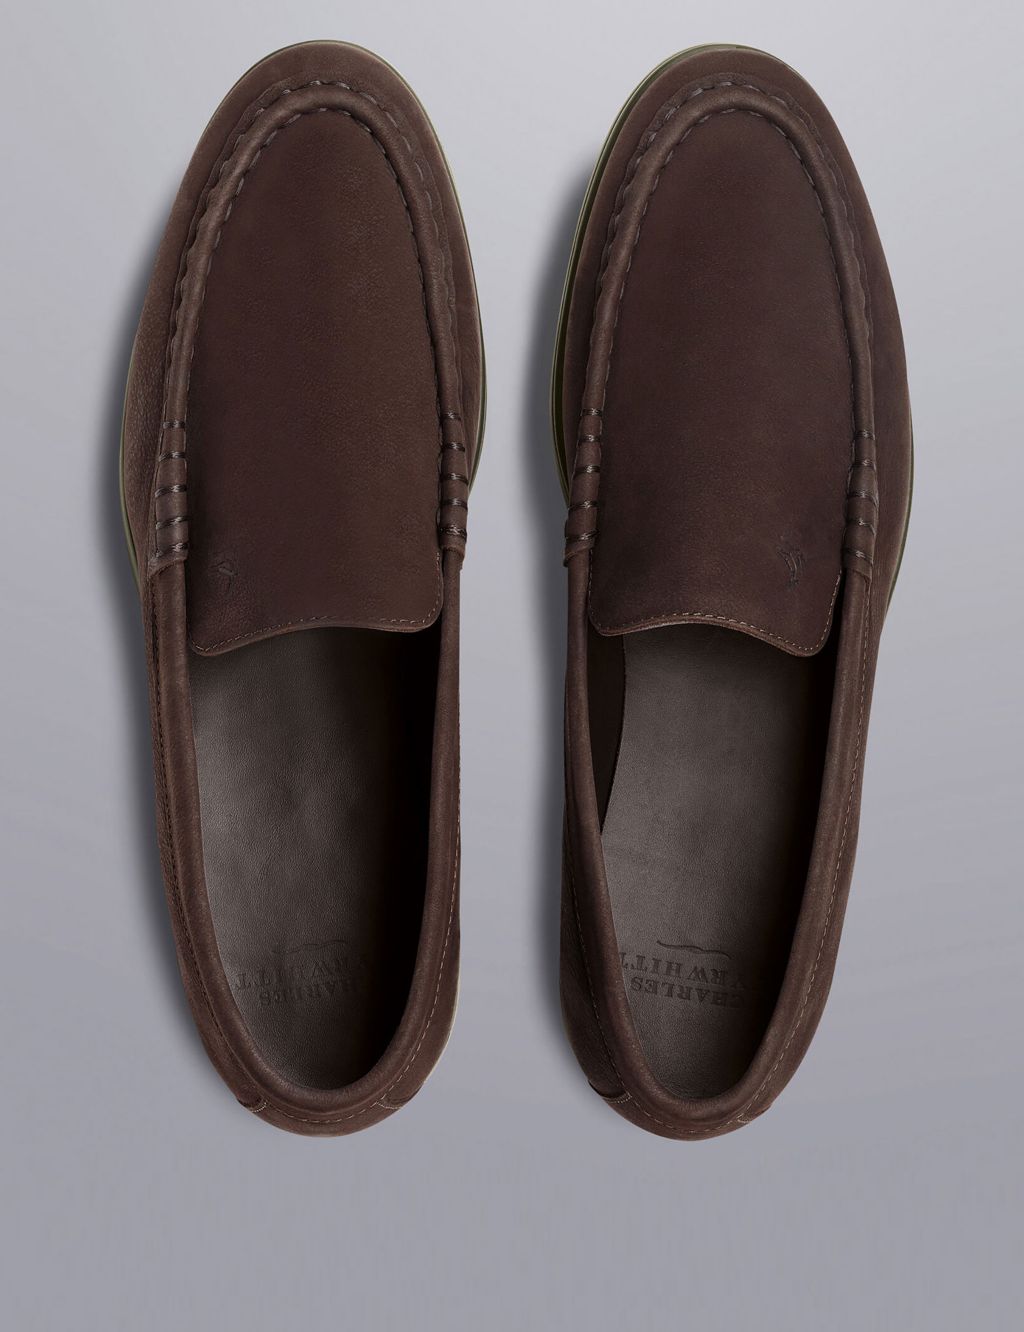 Suede Slip On Shoes image 2